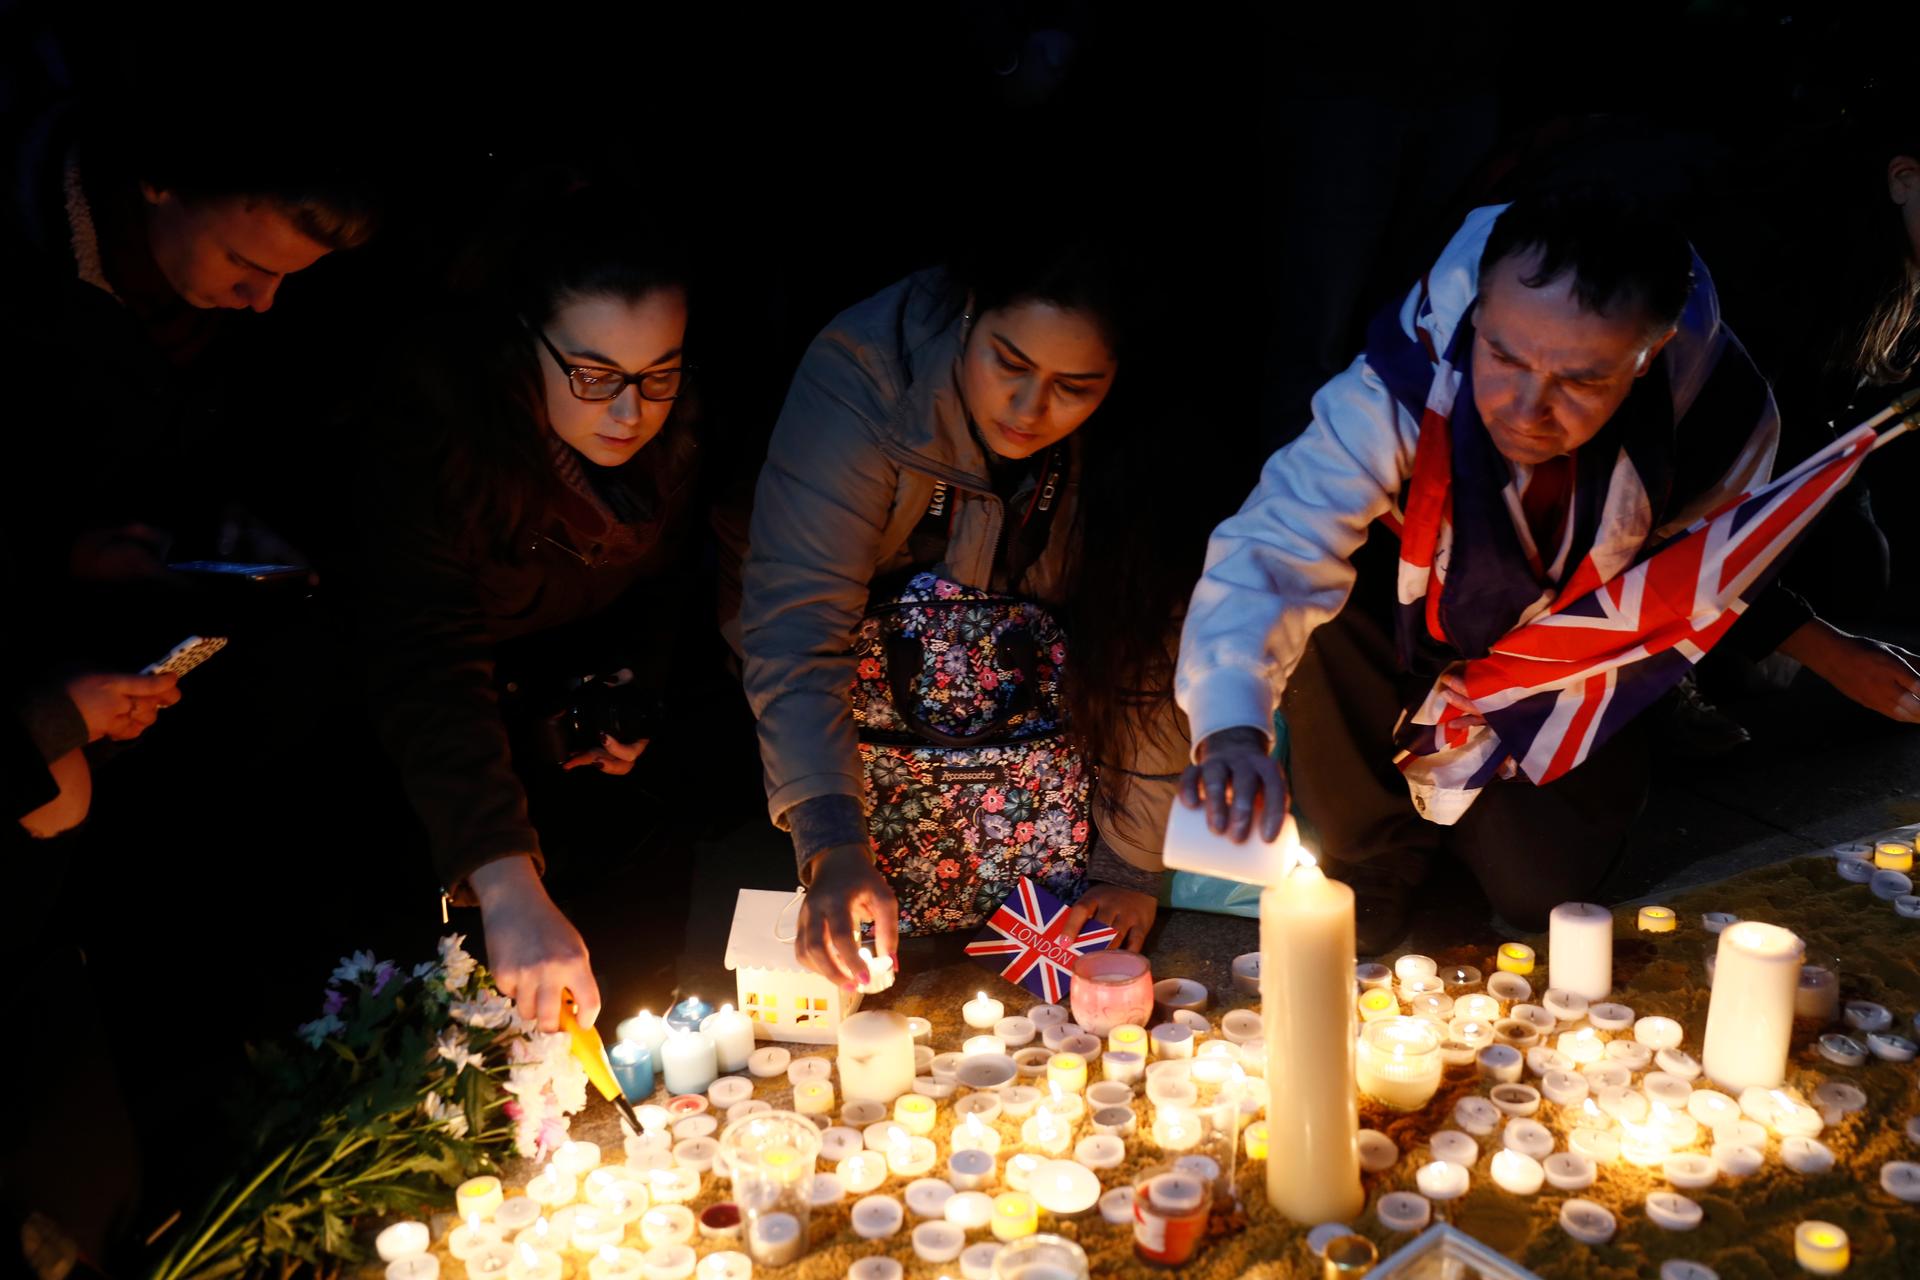 People light candles at a vigil in Trafalgar Square the day after an attack, in London, March 23, 2017.